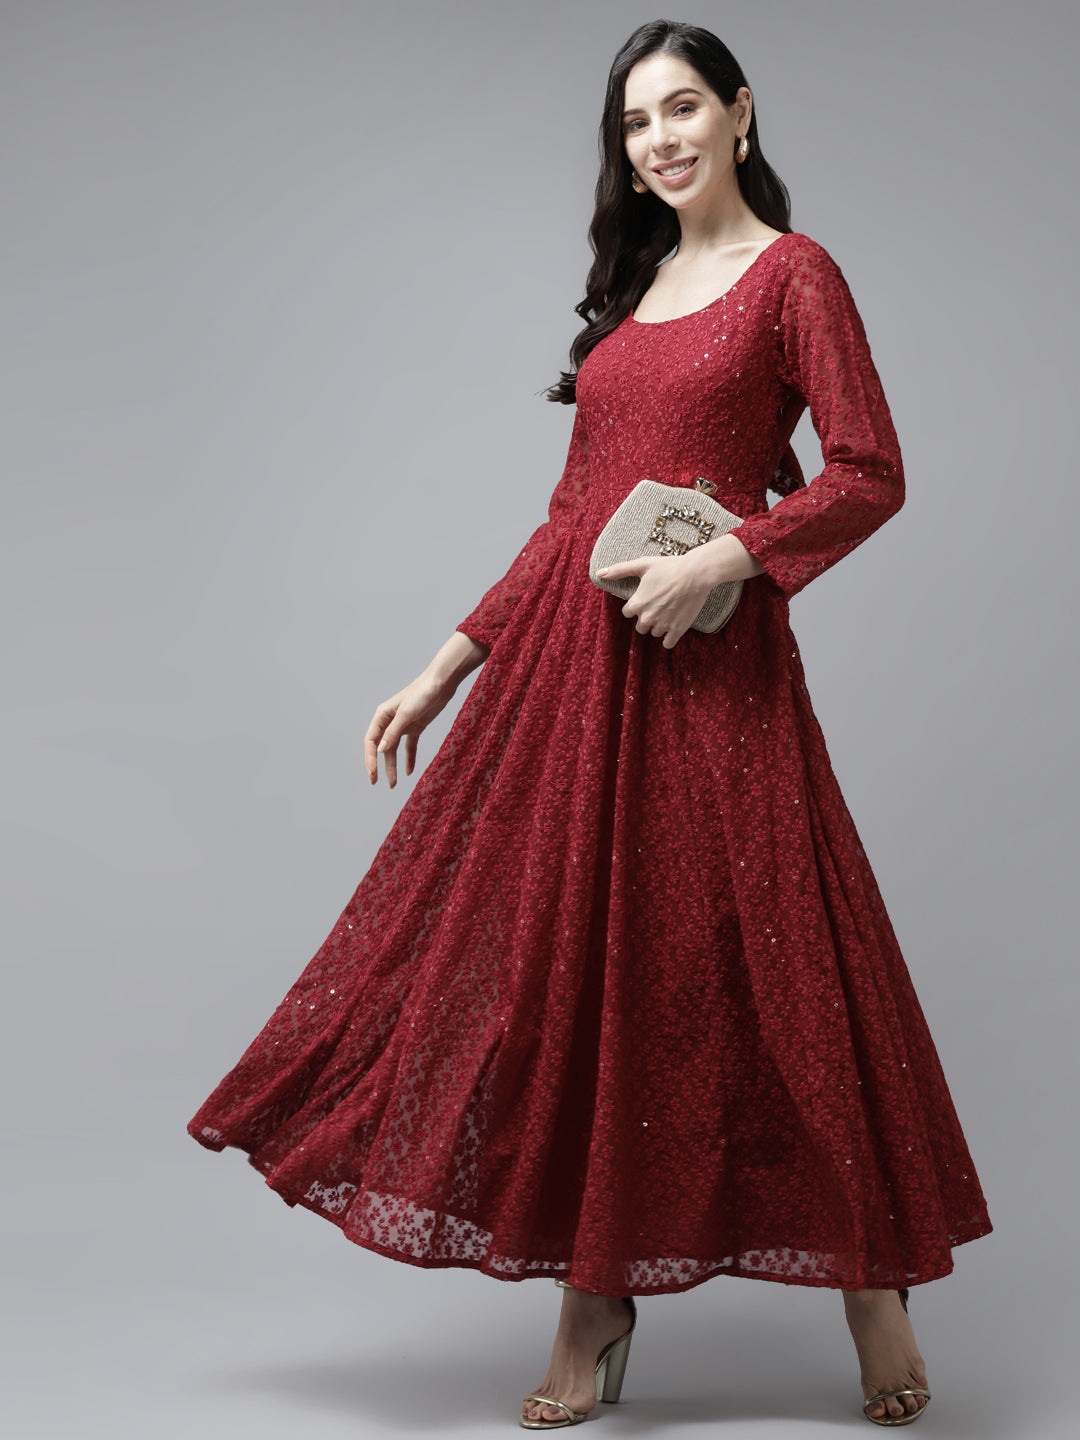 PANIT Women Red Ethnic Motifs Embroidered Ethnic Maxi Dress